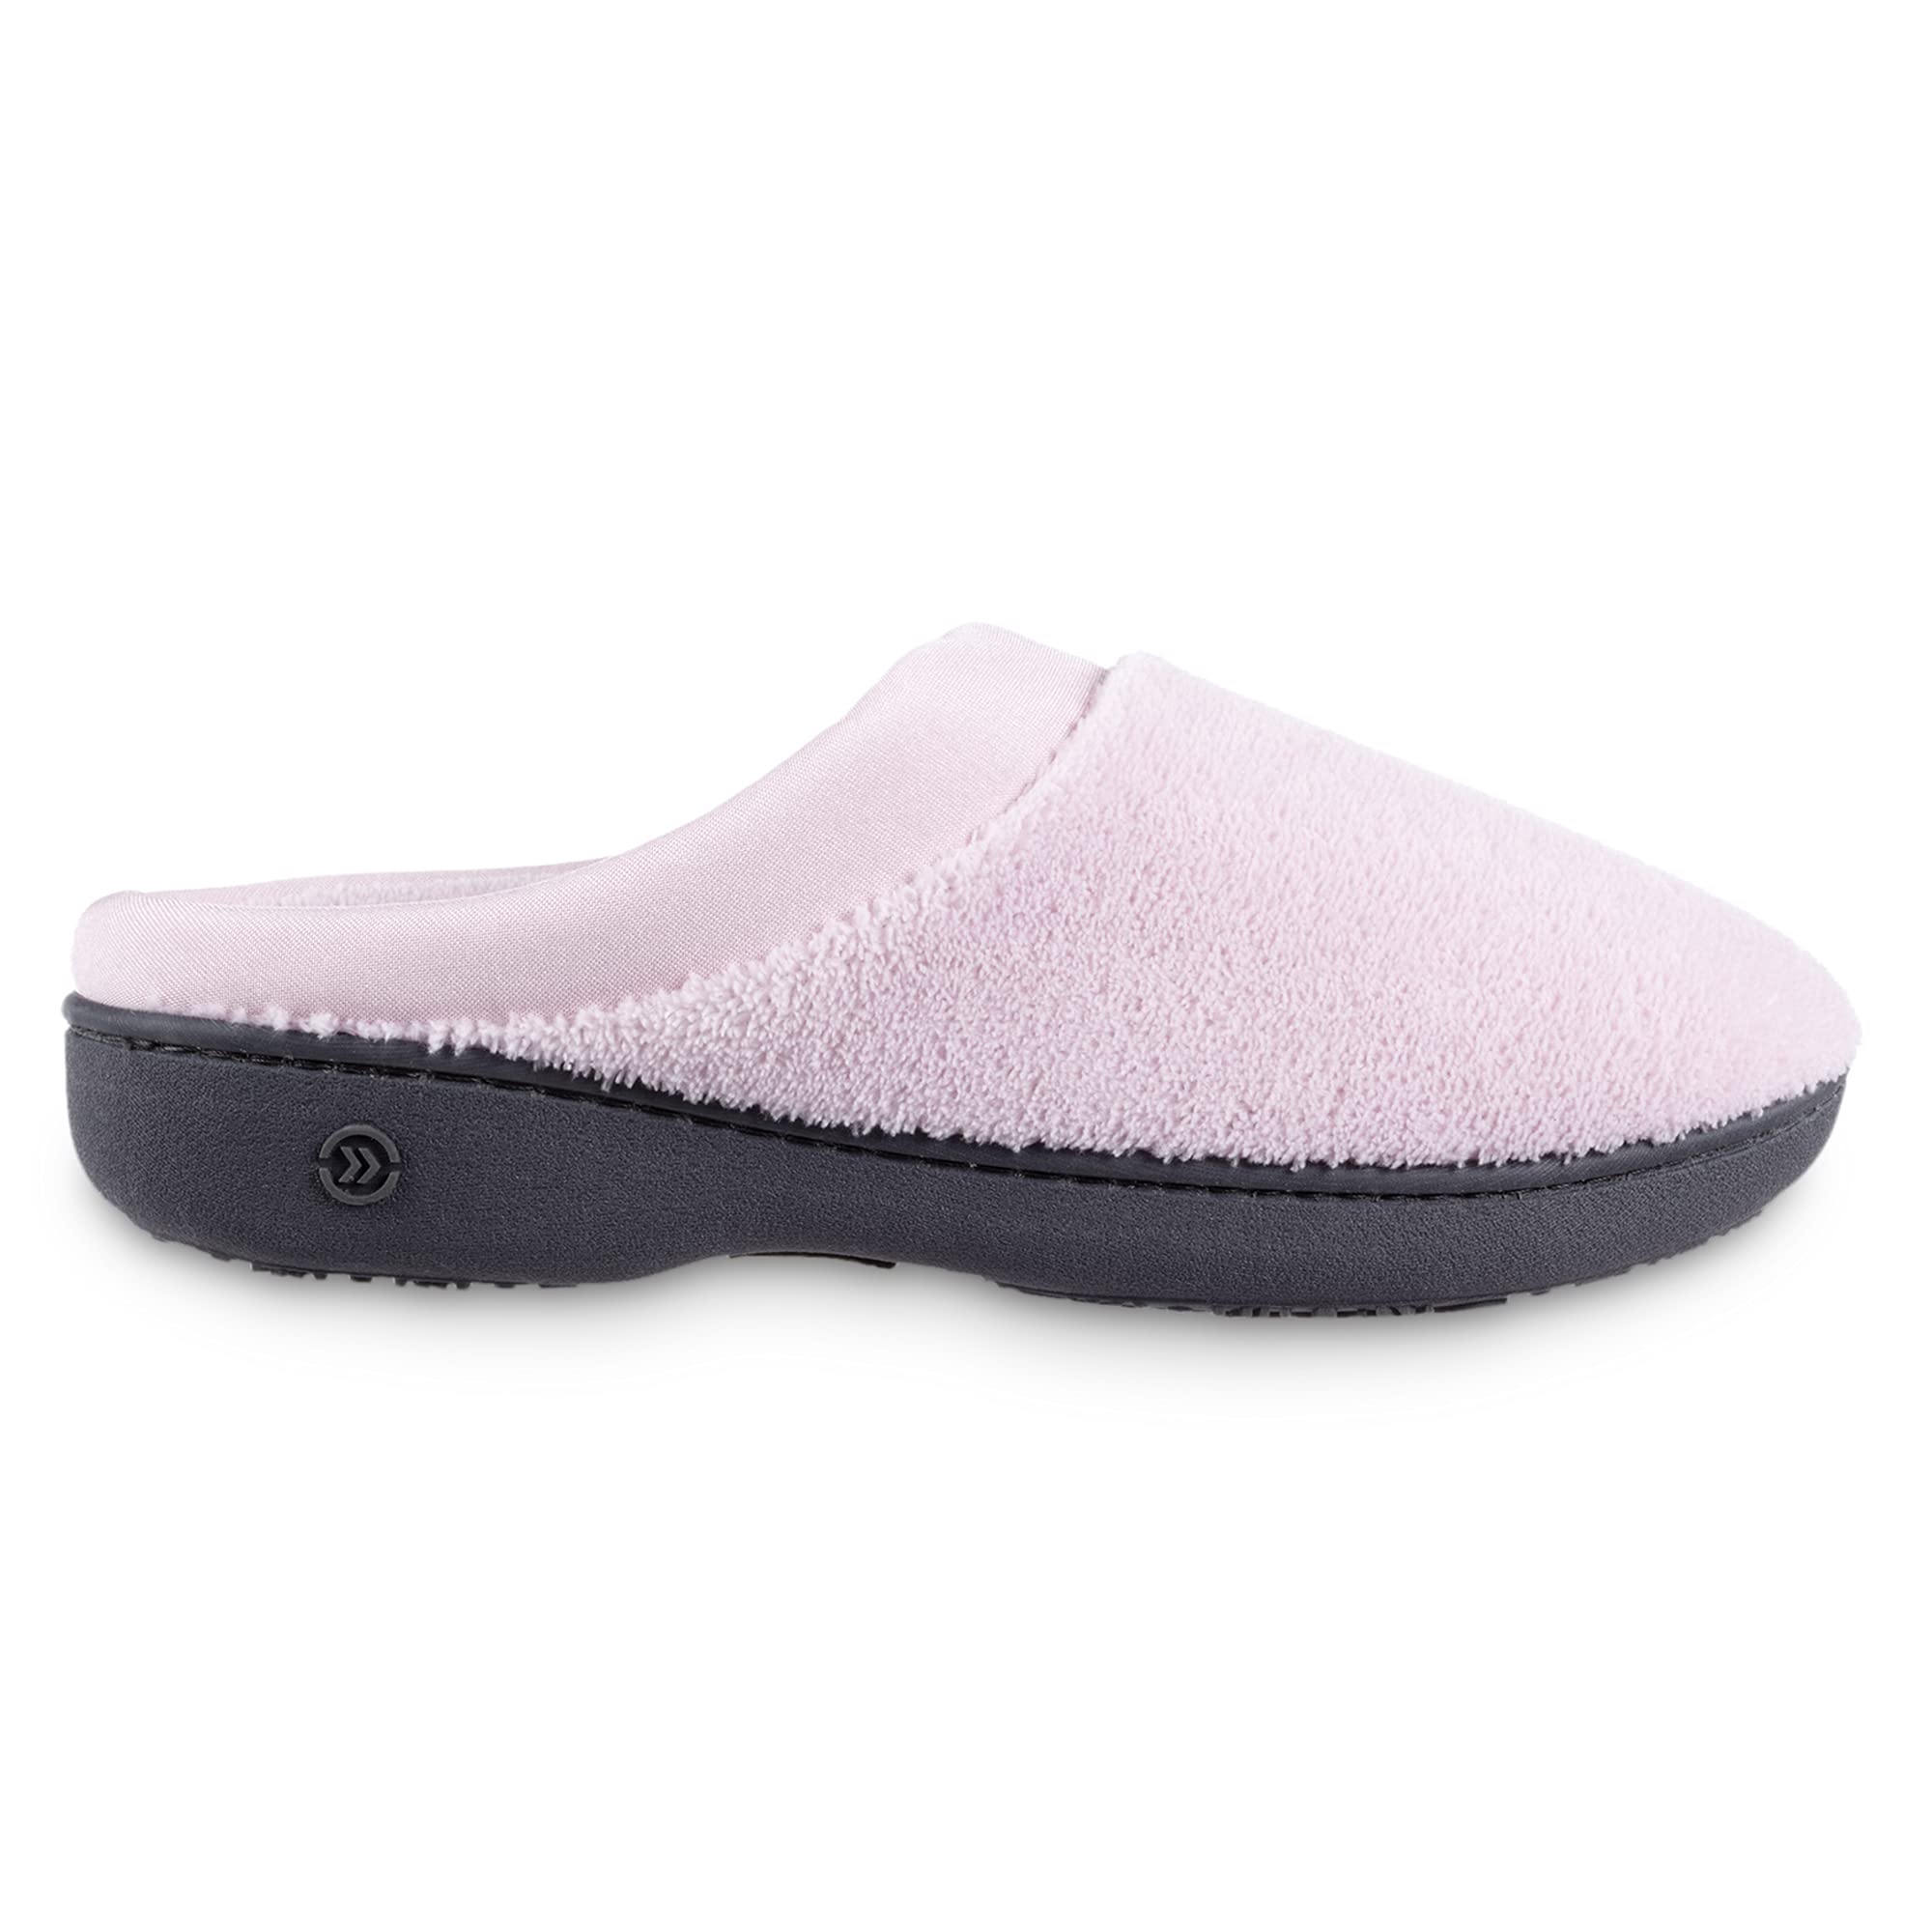 isotoner Women's Terry and Satin Slip on Cushioned Slipper with Memory Foam for Indoor/Outdoor Comfort Flat Sandals